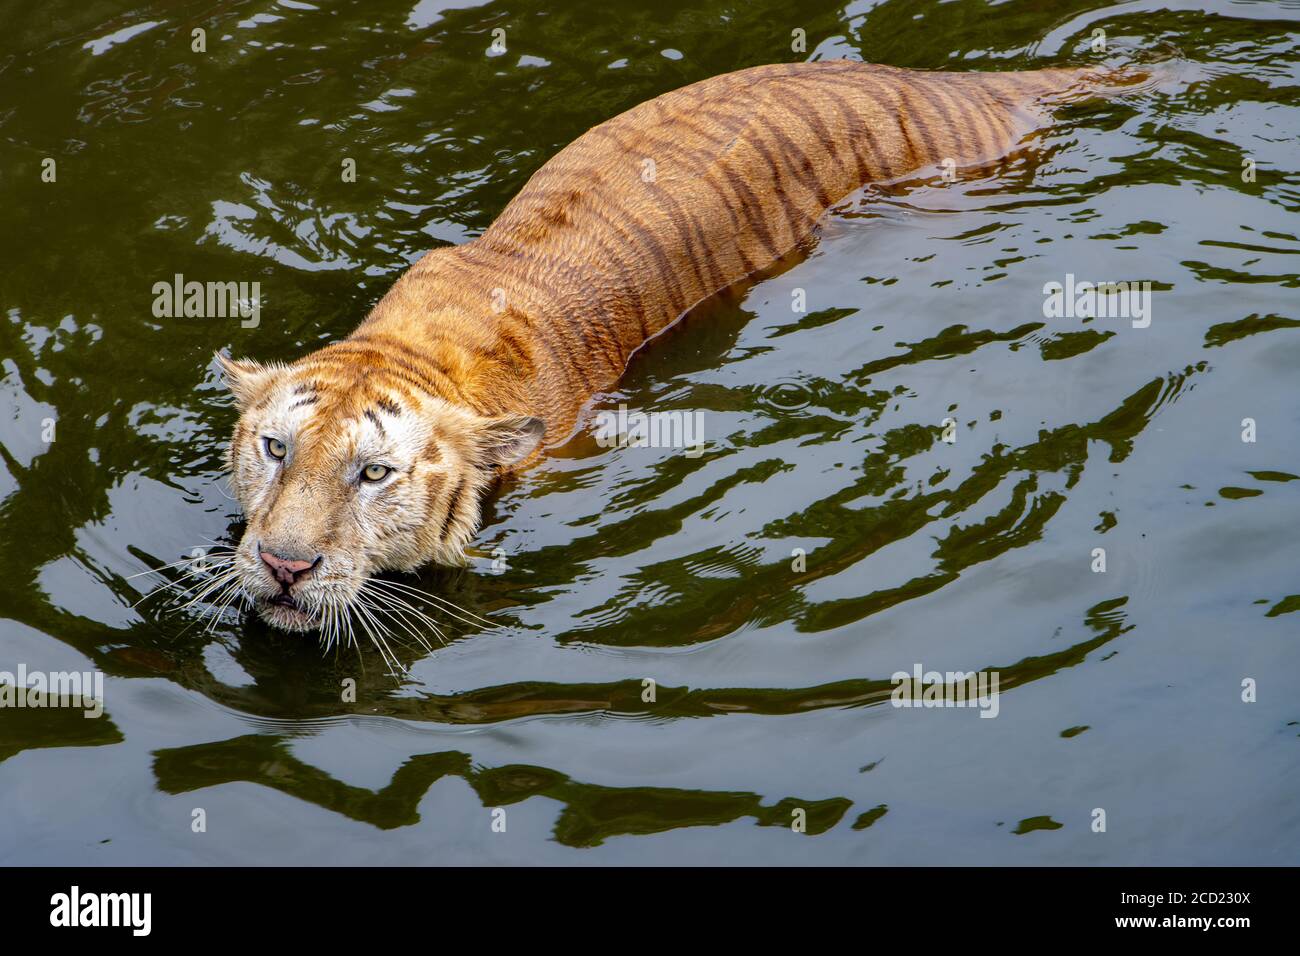 The tiger swims on the water. The tiger stands in the water and looks i front. Stock Photo